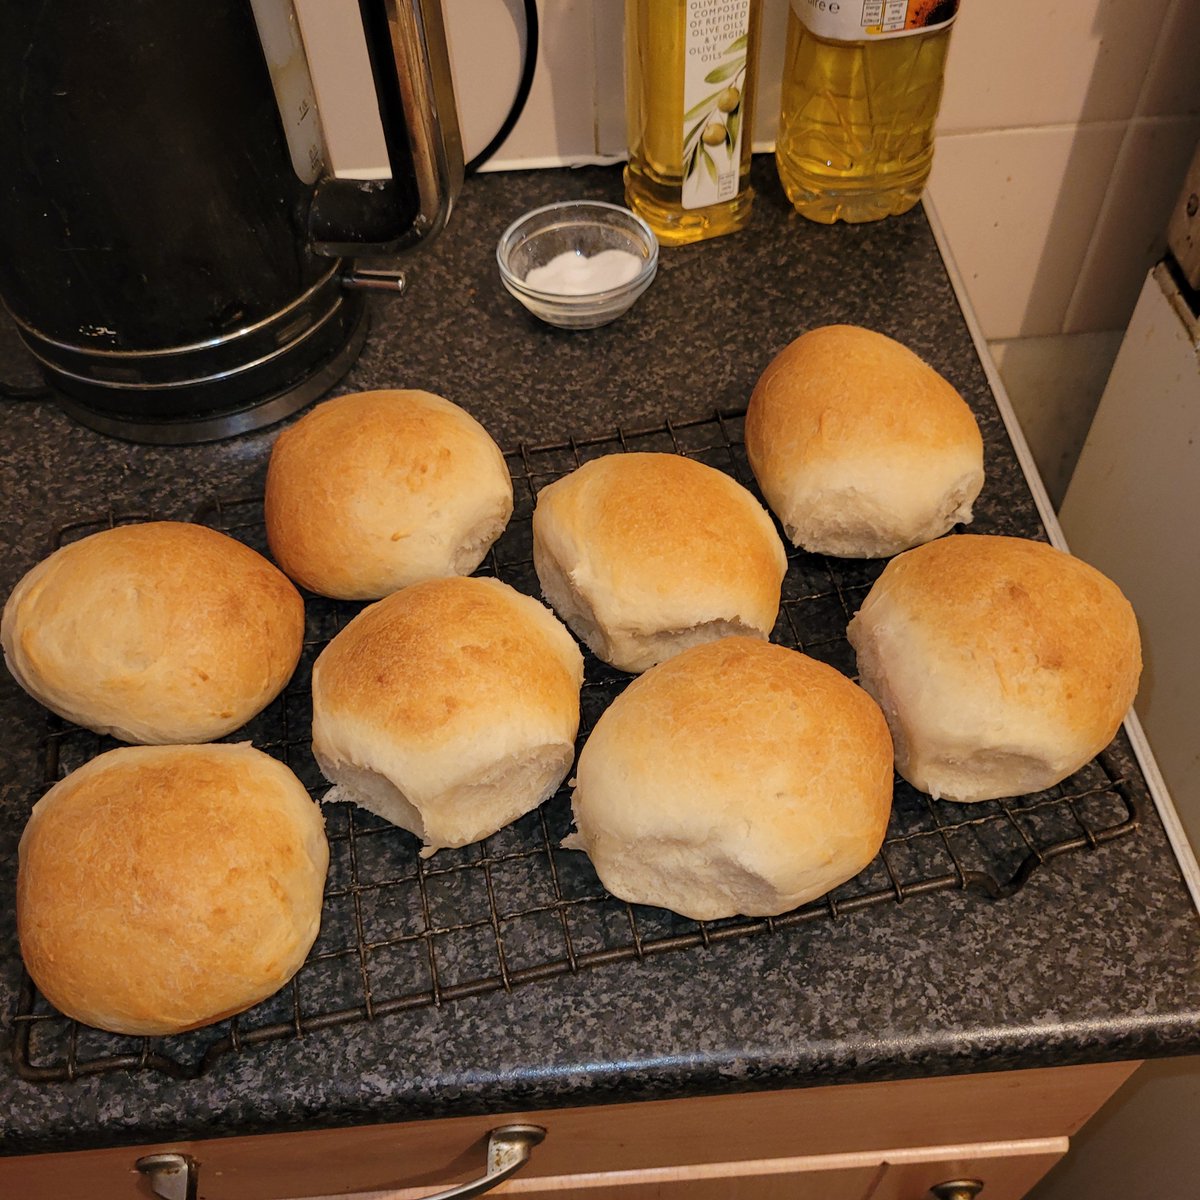 Fresh bread rolls. Chicken roasting in the oven now.

#GreatBritishFood
#Homemade 
#Foodie 
#food